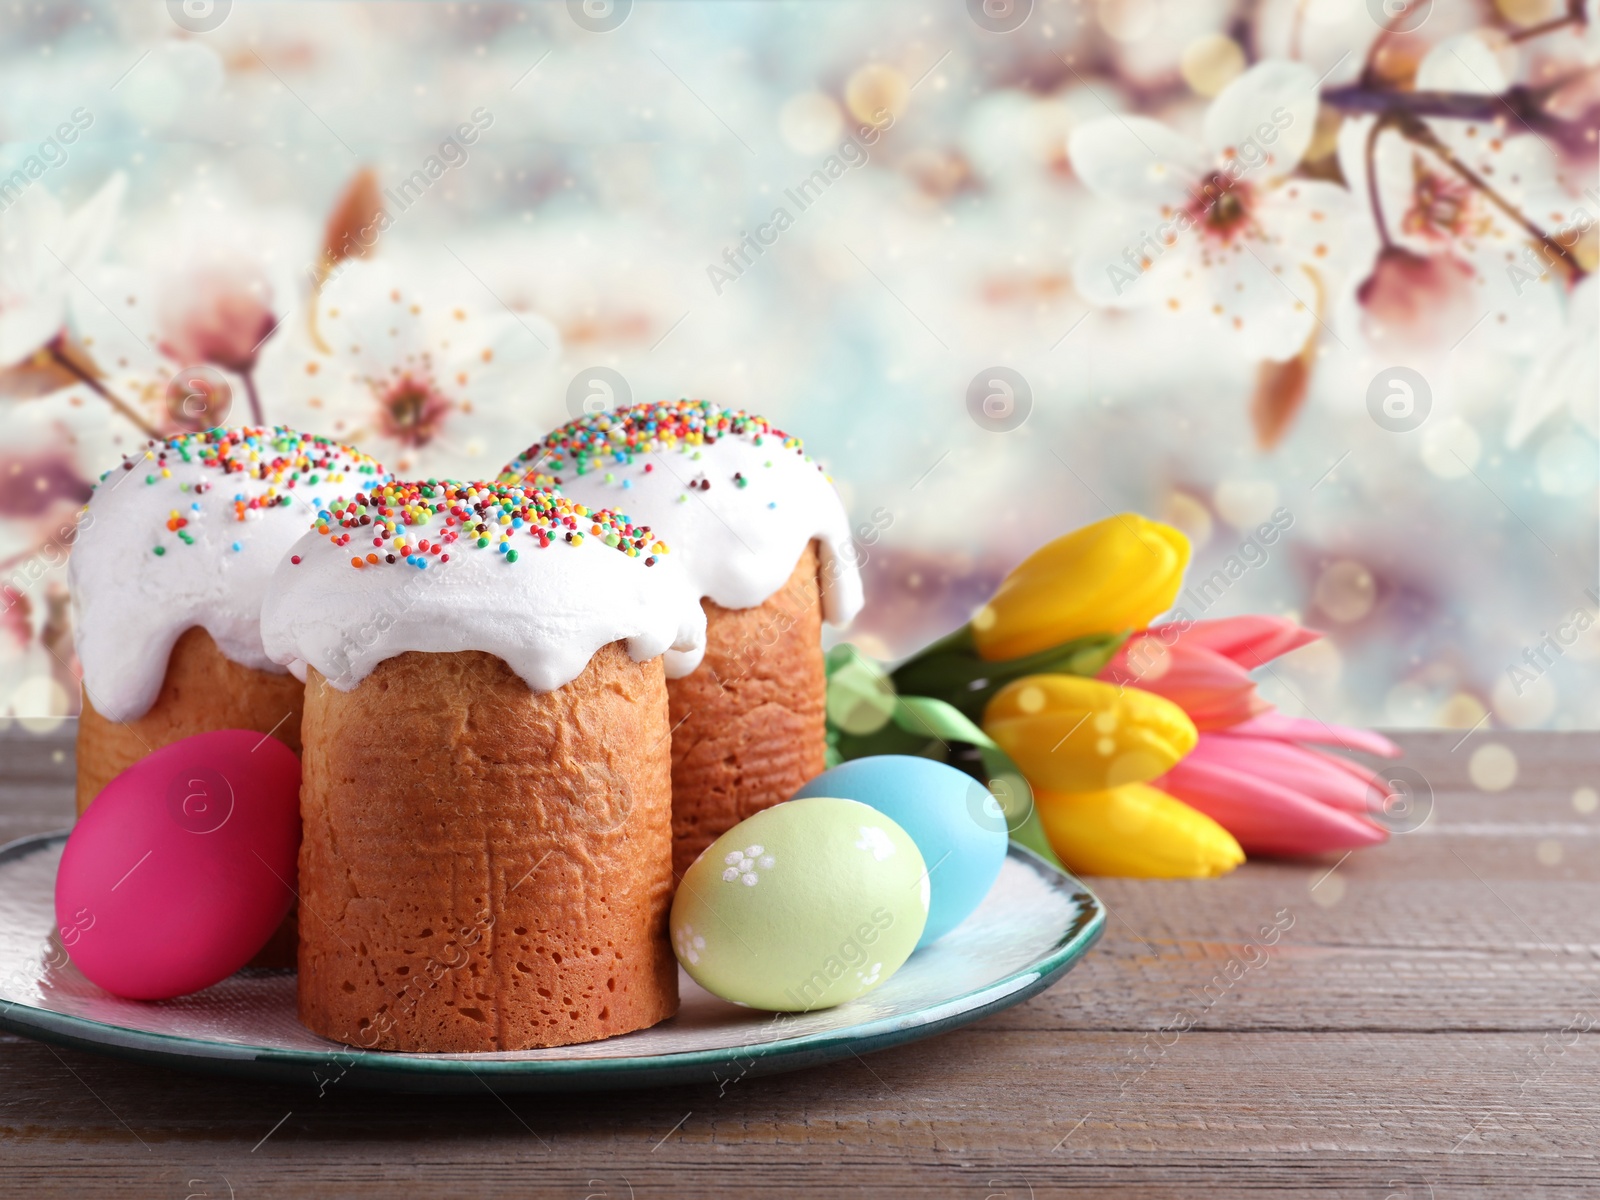 Image of Delicious Easter cakes, tulips and dyed eggs on wooden table outdoors